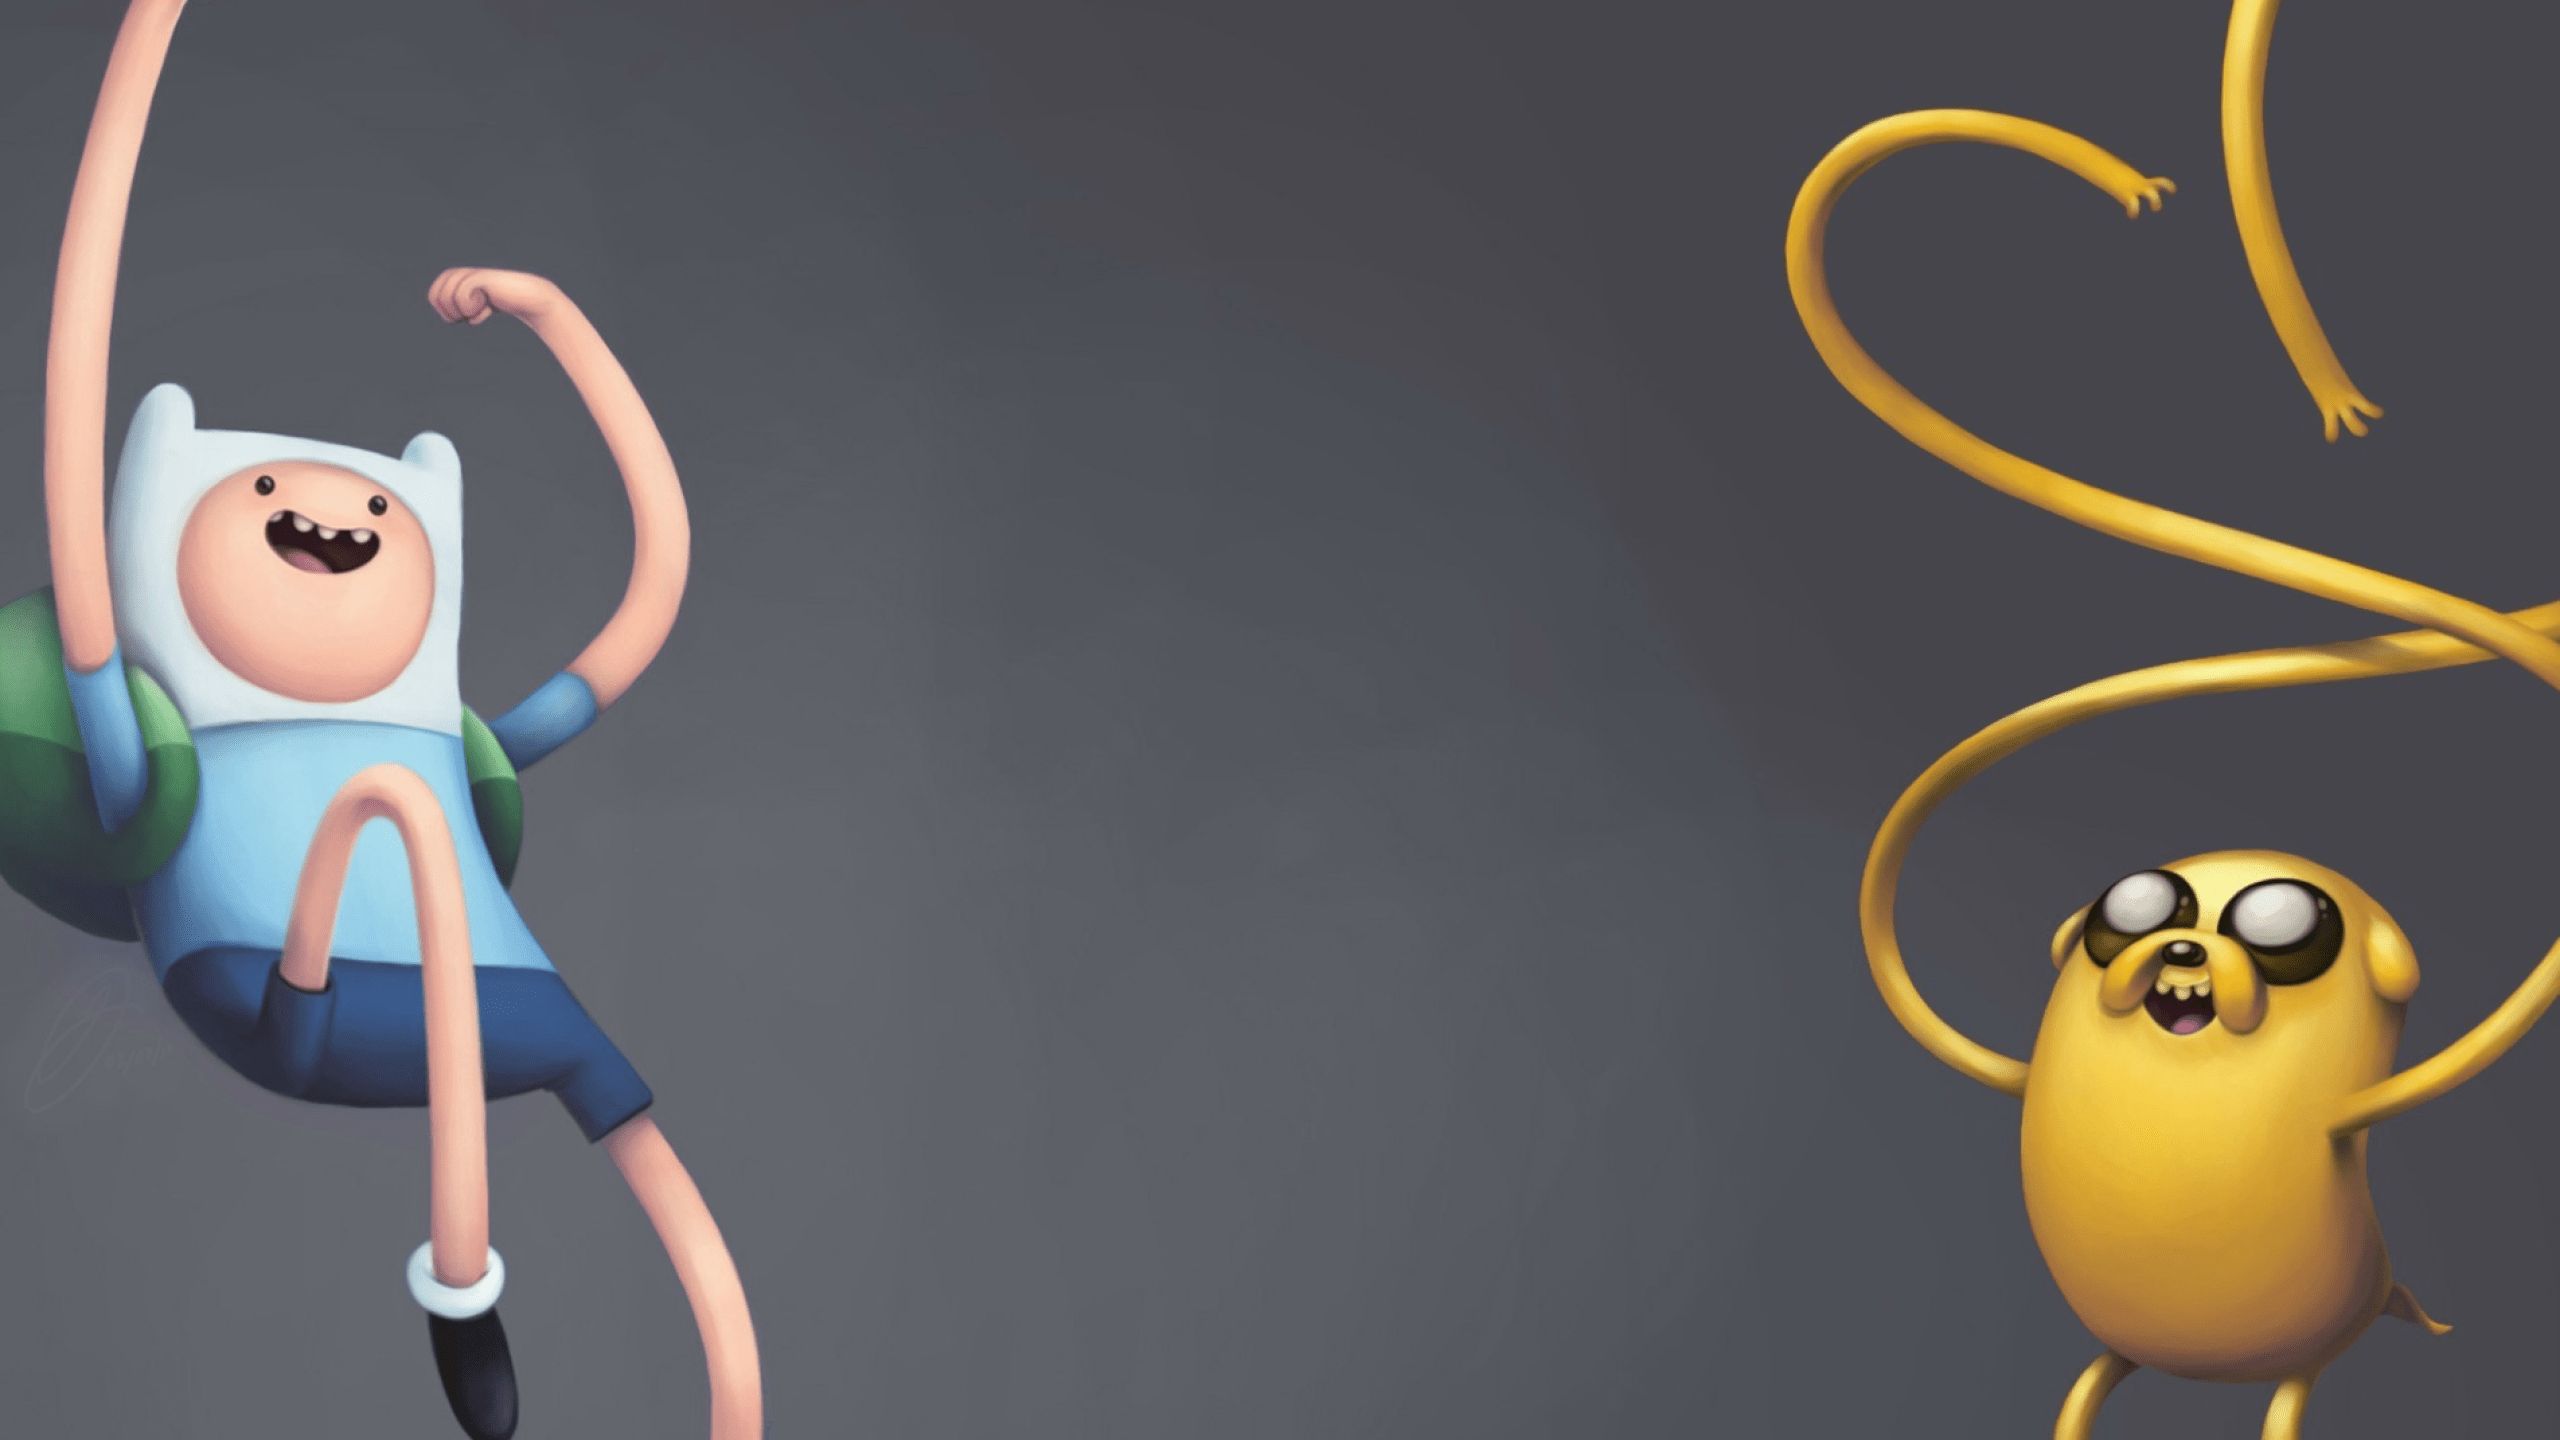 Finn and Jake from Adventure Time wallpaper 1920x1080 for desktop - Adventure Time